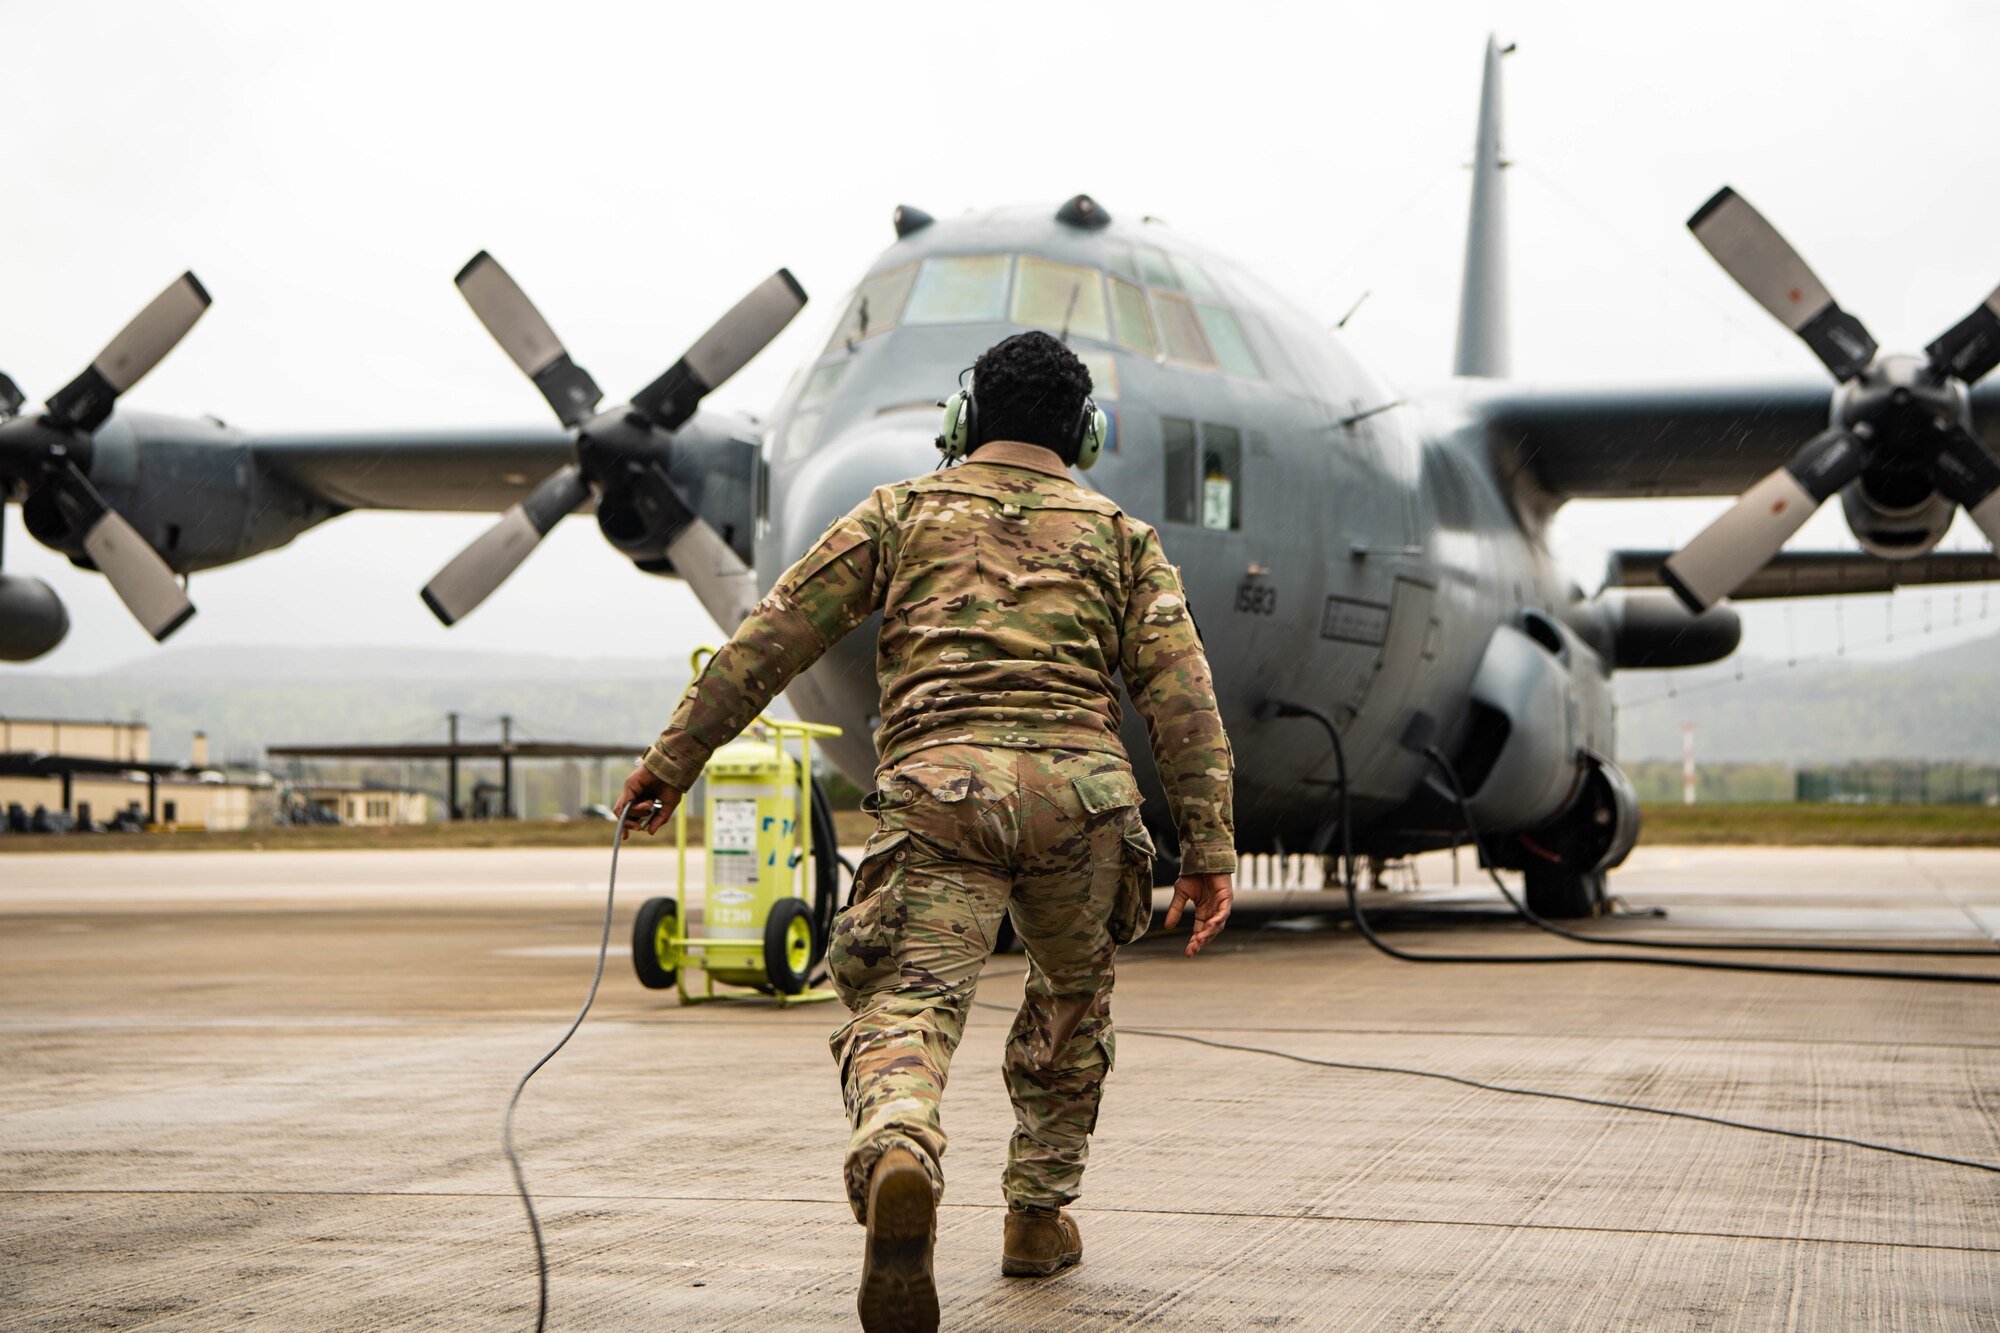 Male Airman prepares aircraft for take-off